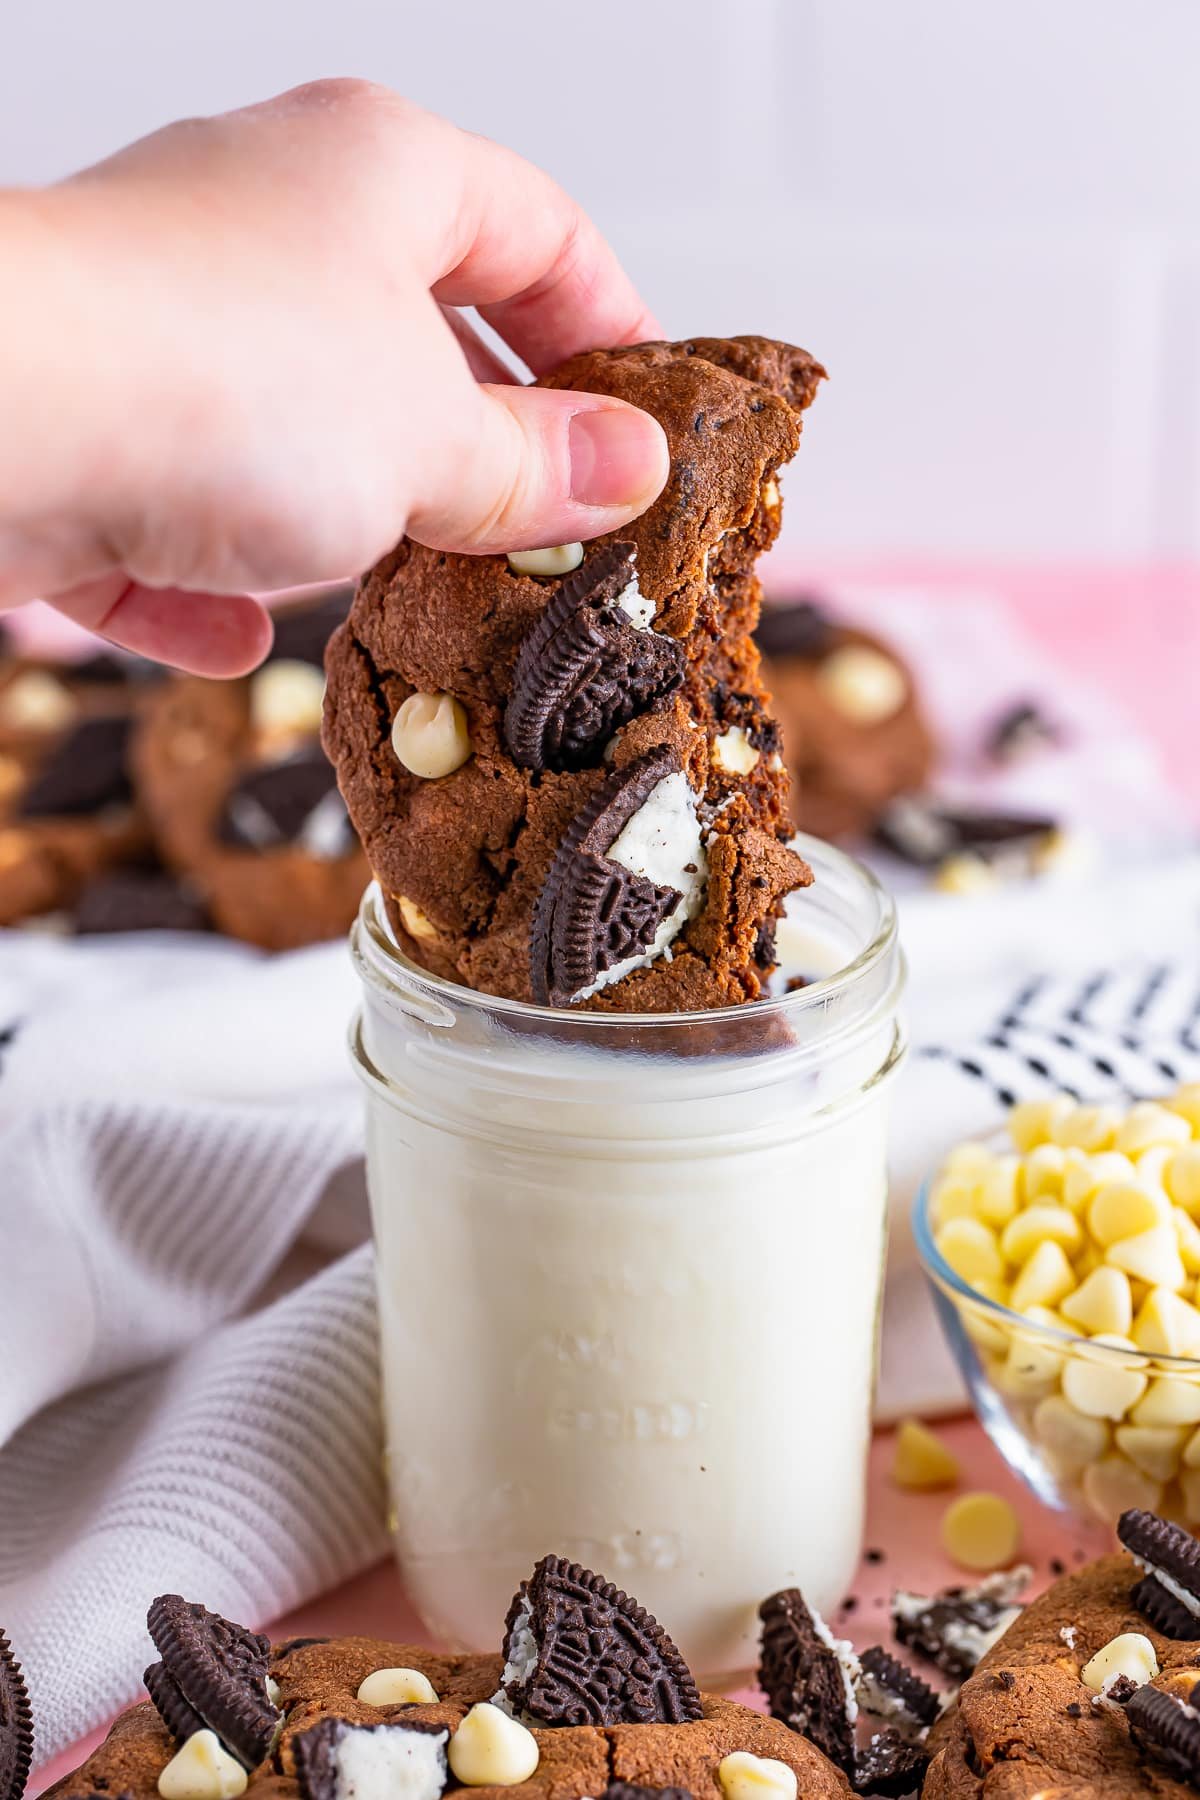 A hand dunking half of a cookies and cream cookie into a glass of milk